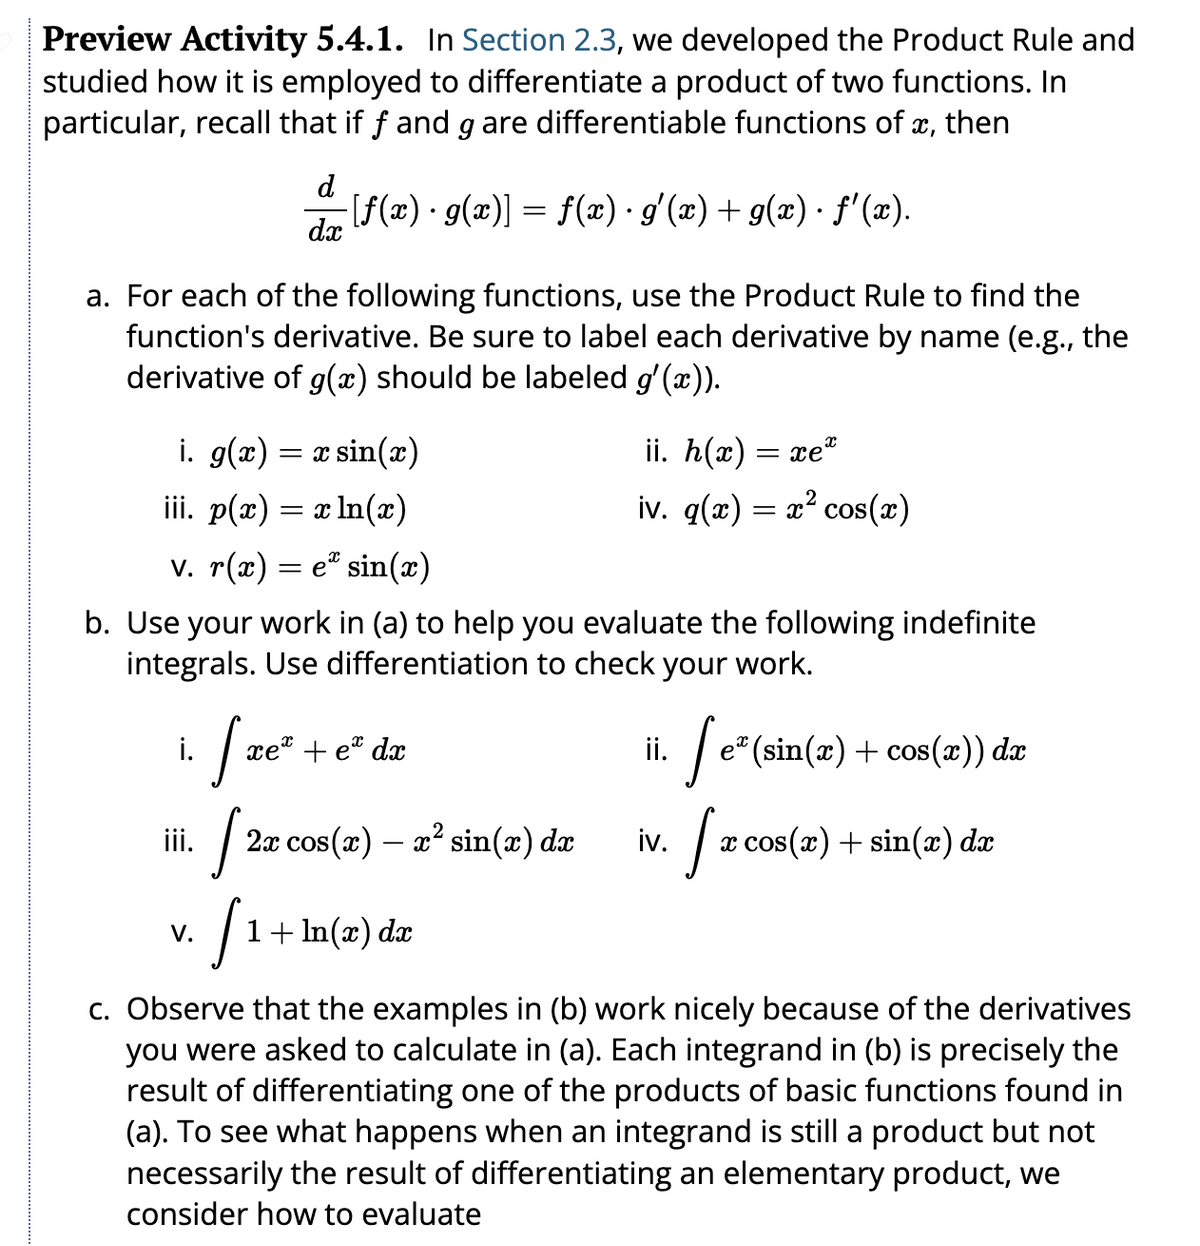 Preview Activity 5.4.1. In Section 2.3, we developed the Product Rule and
studied how it is employed to differentiate a product of two functions. In
particular, recall that if f and g are differentiable functions of x, then
a. For each of the following functions, use the Product Rule to find the
function's derivative. Be sure to label each derivative by name (e.g., the
derivative of g(x) should be labeled g'(x)).
i.
d
-[ƒf(x) · g(x)] = f(x) · g'(x) + g(x) · ƒ'(x).
dx
i. g(x) = x sin(x)
iii. p(x) = x ln(x)
v. r(x) = e* sin(x)
b. Use your work in (a) to help you evaluate the following indefinite
integrals. Use differentiation to check your work.
iii.
V.
xe te da
[2x
[1+
1 + ln(x) dx
ii. h(x):
=xe*
iv. q(x) = x² cos(x)
2x cos(x) — x² sin(x) dx
ii.
iv.
e* (sin(x) + cos(x)) dx
[x
x cos(x) + sin(x) dx
c. Observe that the examples in (b) work nicely because of the derivatives
you were asked to calculate in (a). Each integrand in (b) is precisely the
result of differentiating one of the products of basic functions found in
(a). To see what happens when an integrand is still a product but not
necessarily the result of differentiating an elementary product, we
consider how to evaluate